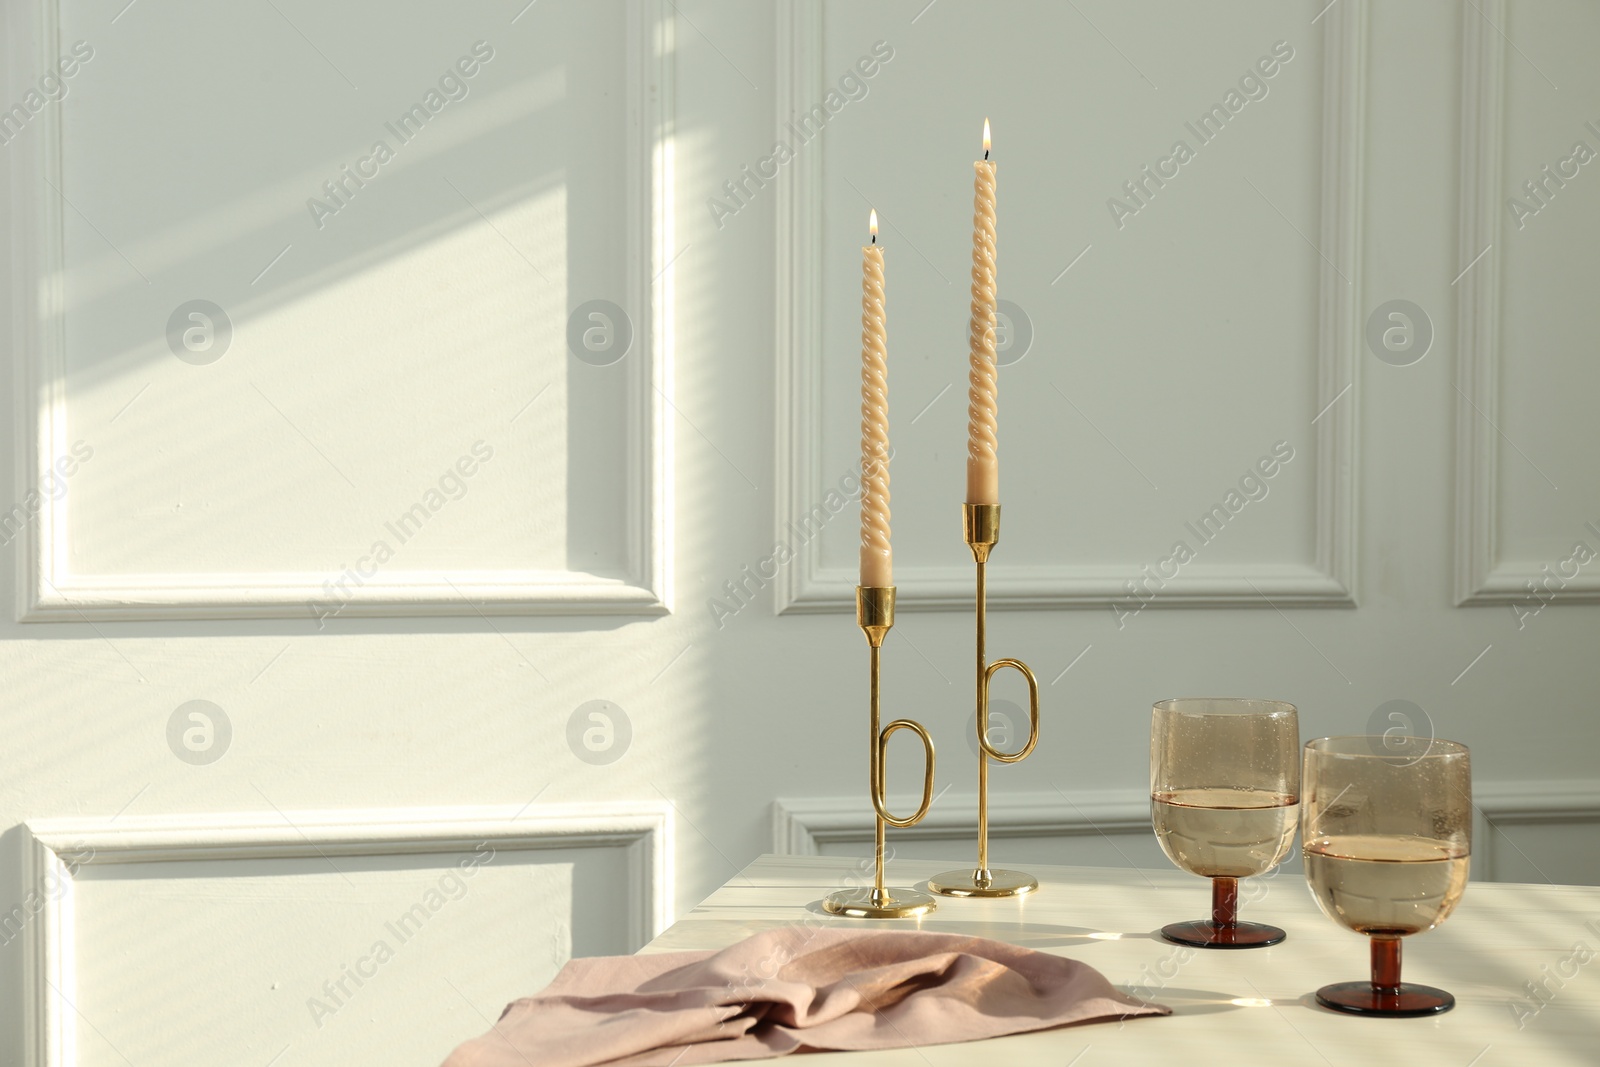 Photo of Glasses of wine near burning candles on white table indoors, space for text